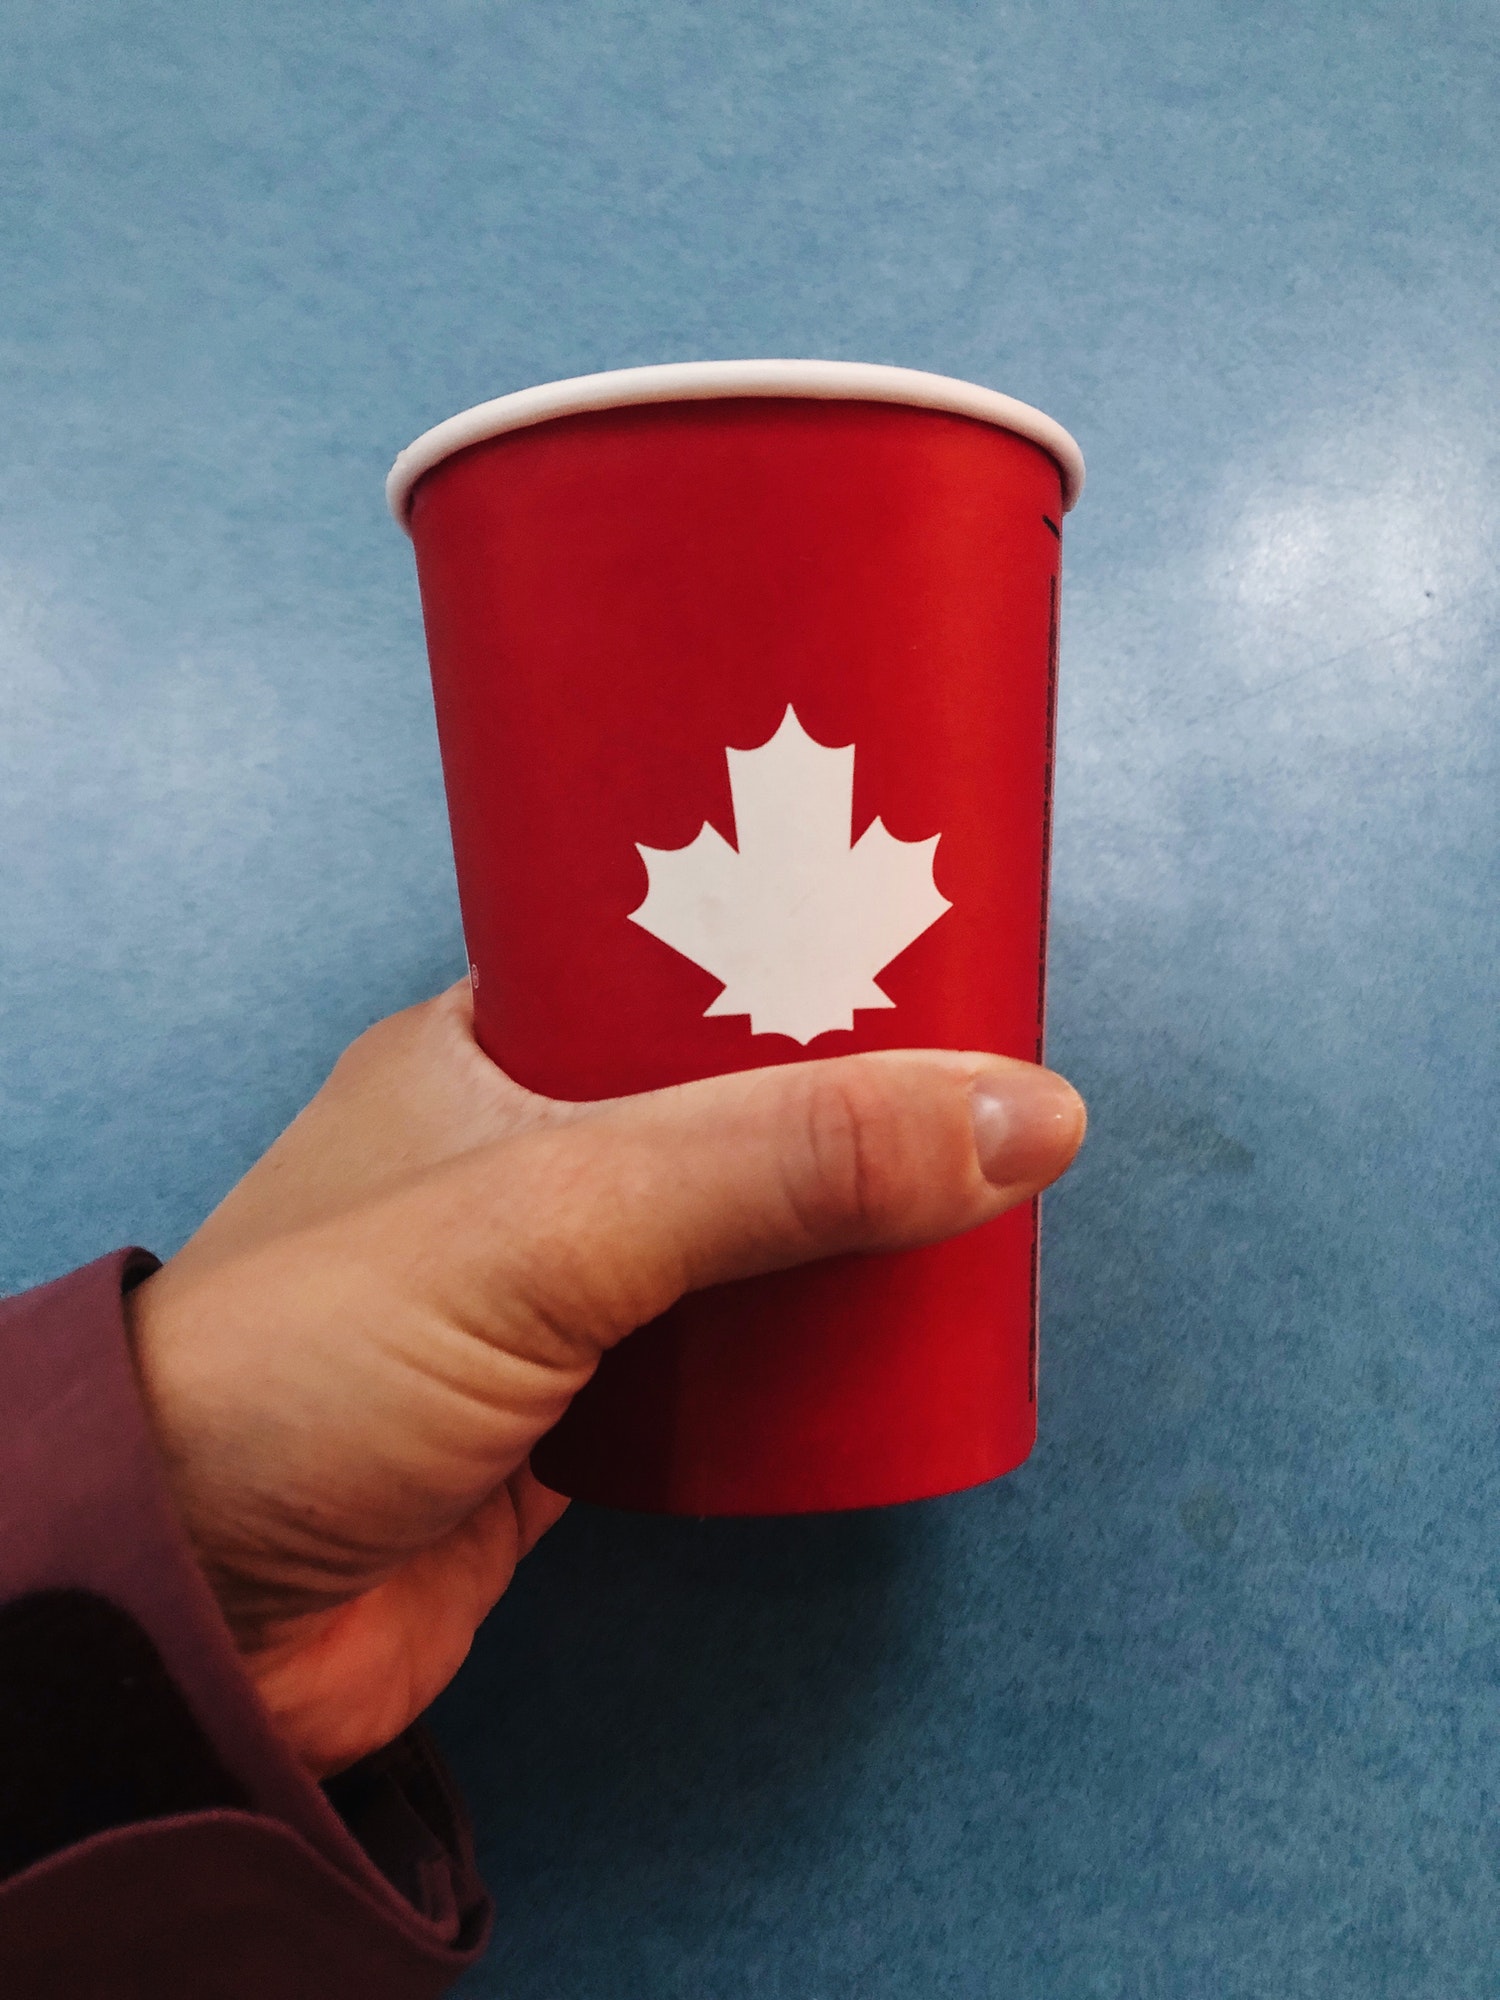 And holding red cup with Canadian flag